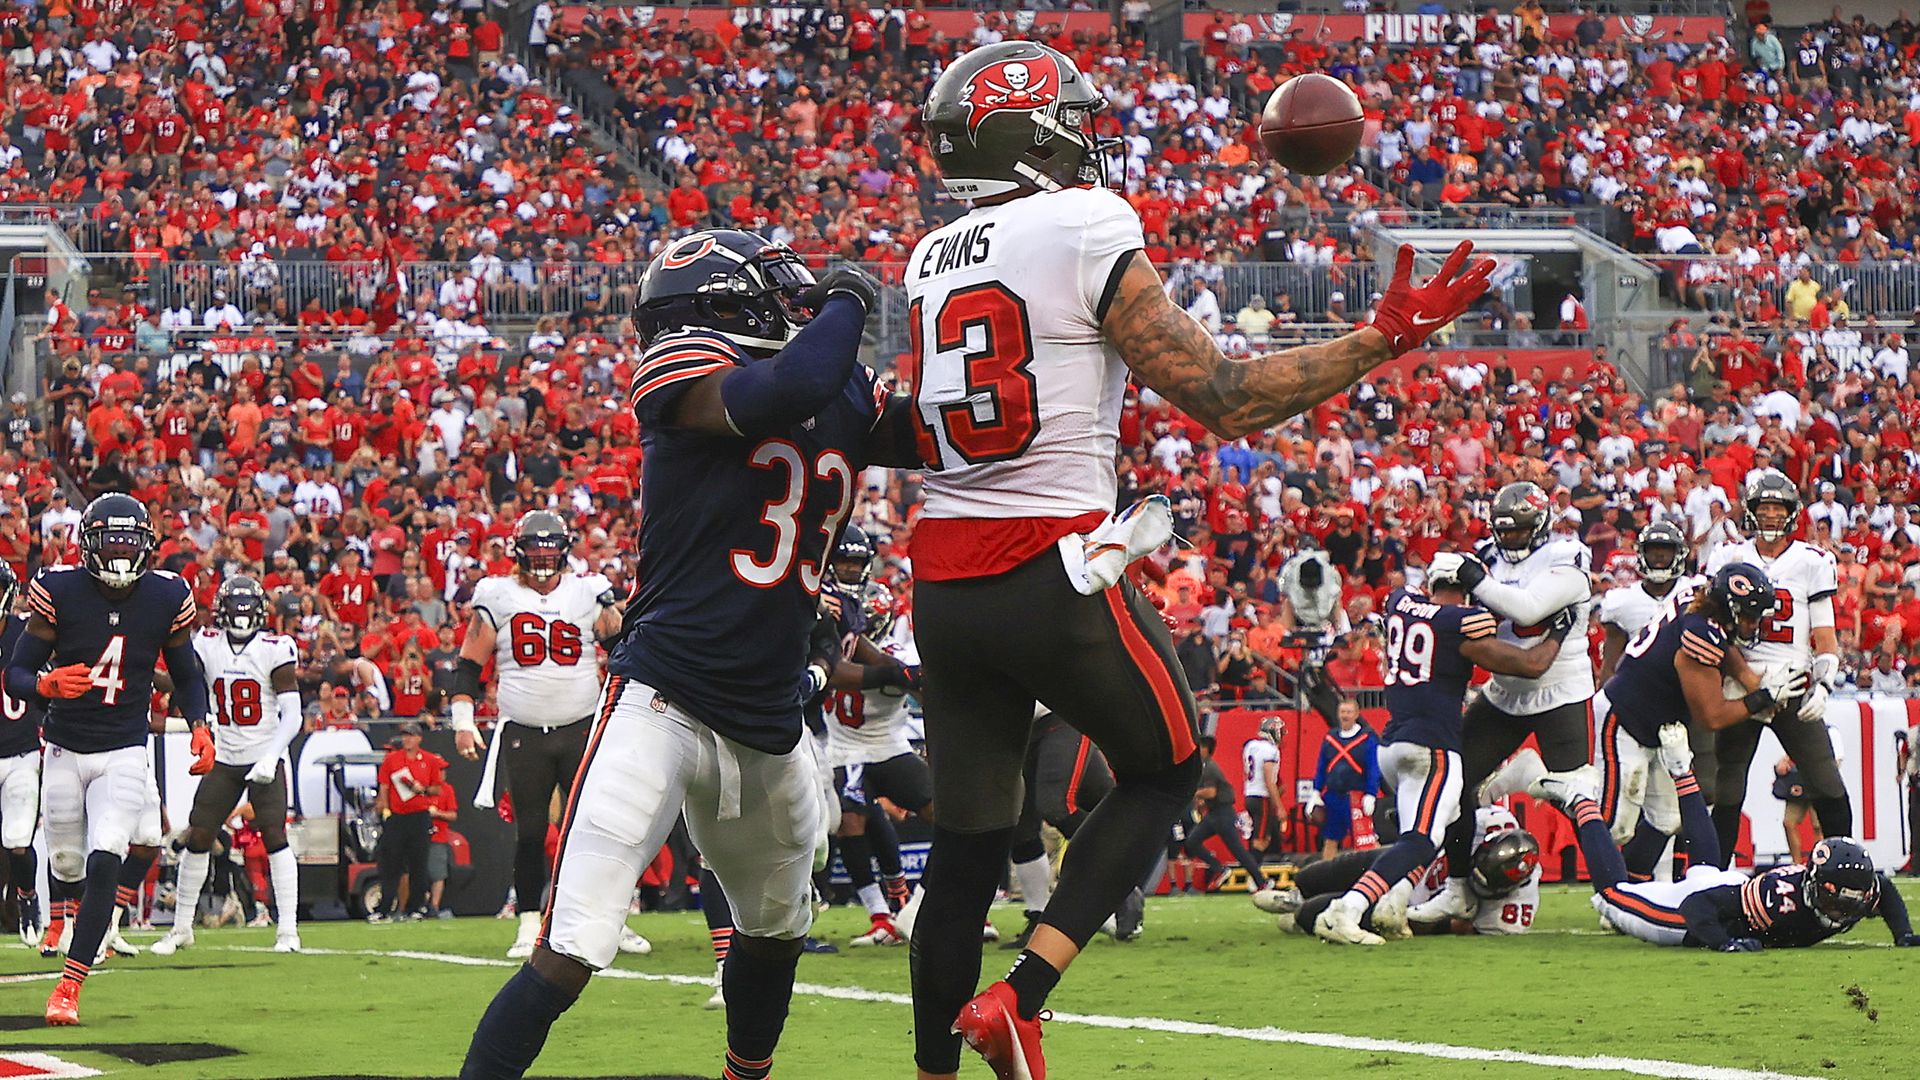 Mike Evans of the Bucs catches a touchdown pass in the end zone. 